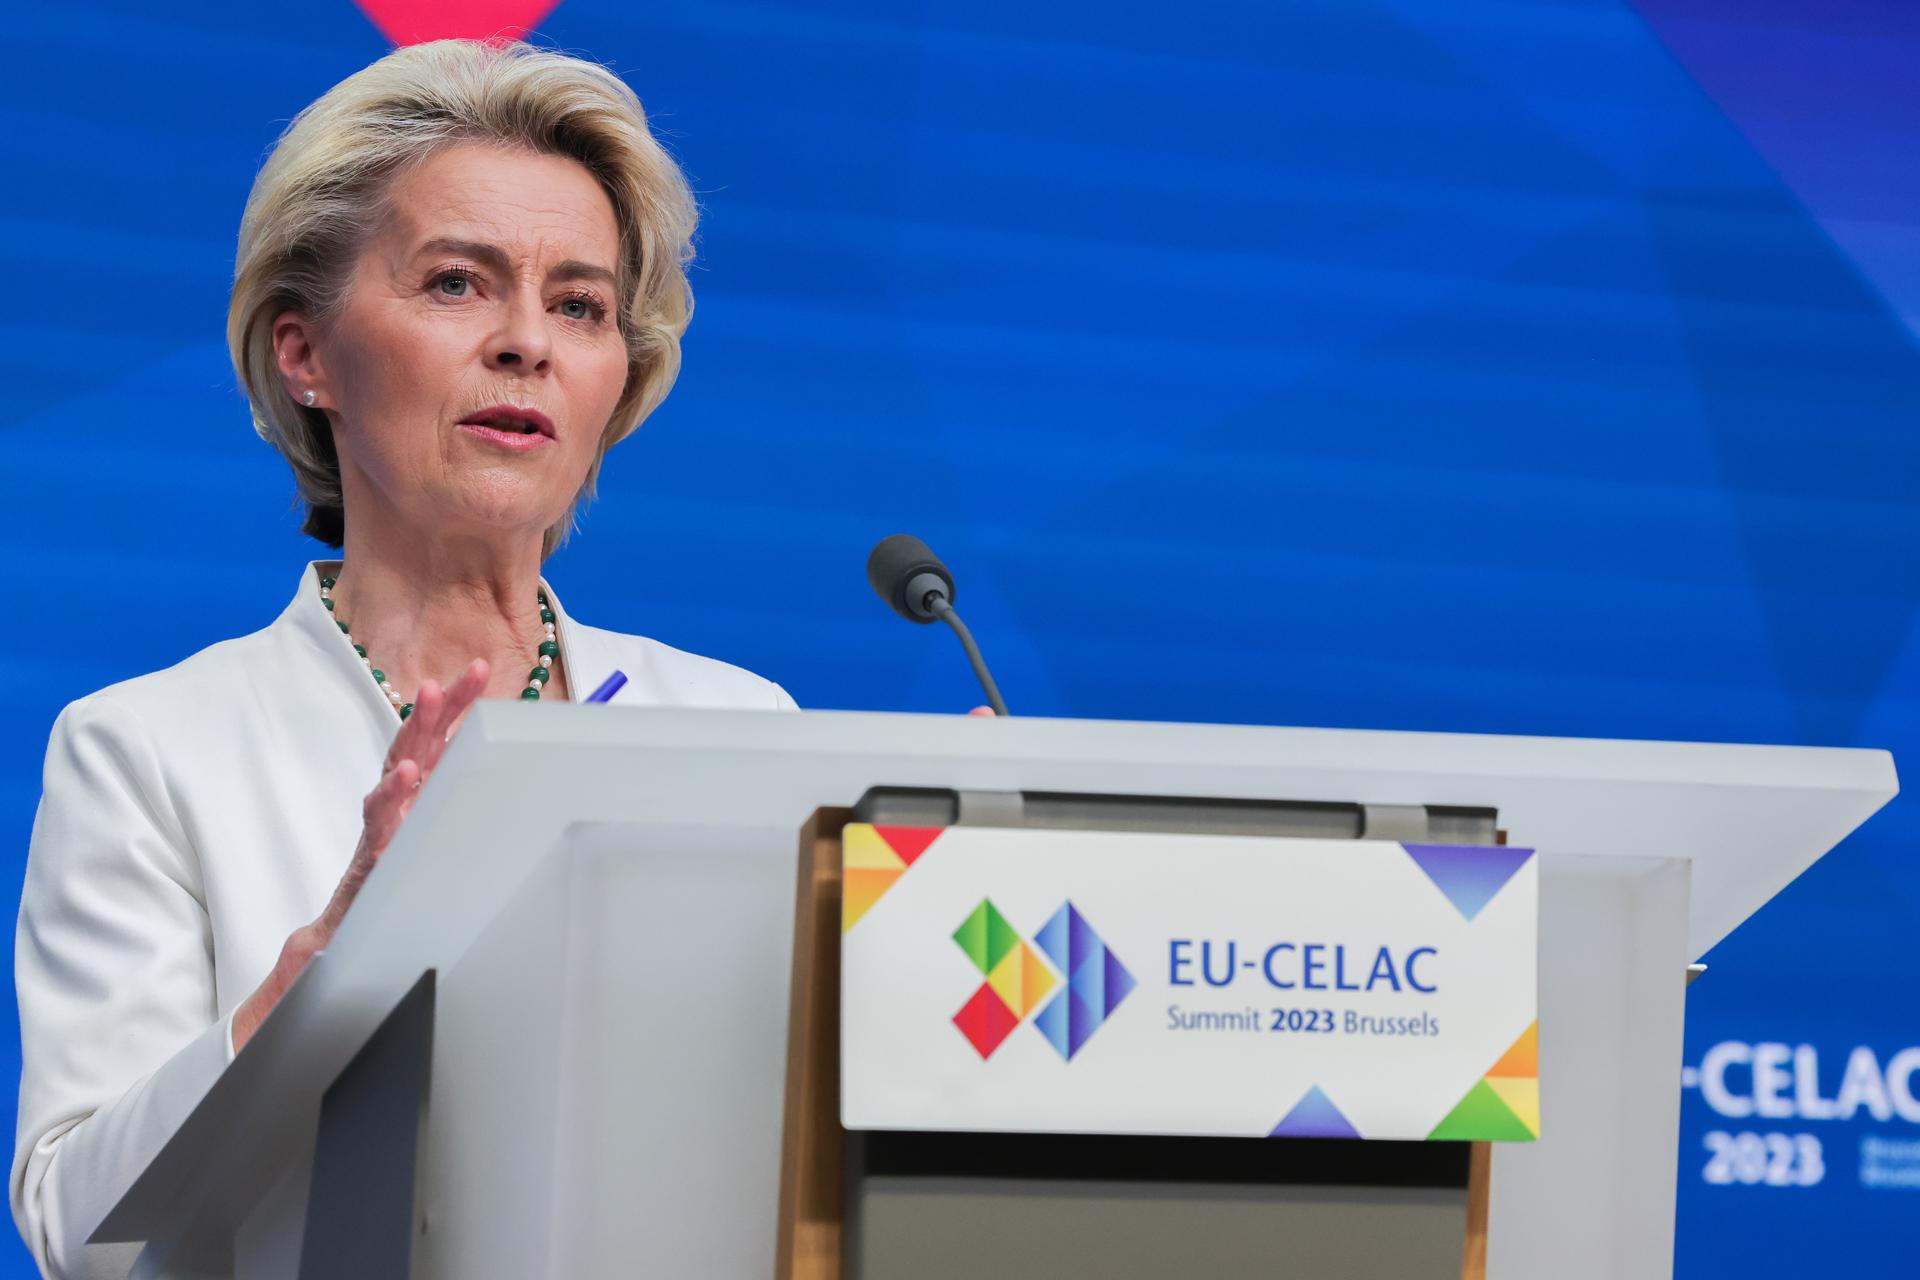 The president of the European Commission, Ursula von der Leyen, speaks to the press after the EU-CELAC Summit of Heads of State and Government meeting in Brussels, Belgium, on 18 July 2023. Leaders from the EU and the Community of Latin American and Caribbean States (CELAC) gathered in Brussels for the third EU-CELAC summit from 17-18 July 2023, with the aim of strengthening relations between both regions. EFE/EPA/OLIVIER MATTHYS